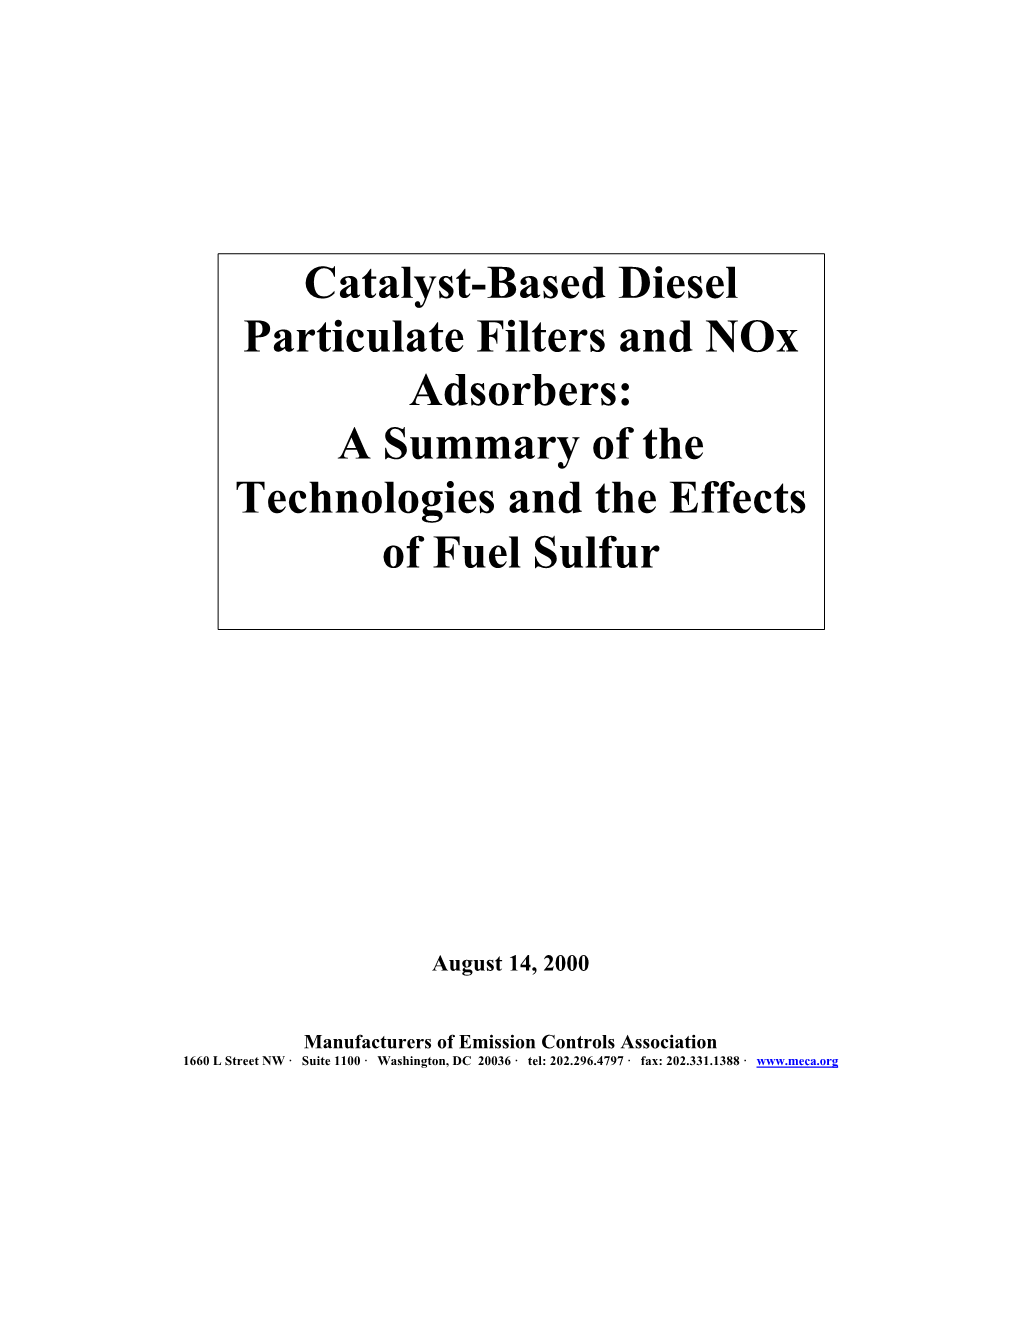 Catalyst-Based Diesel Particulate Filters and Nox Adsorbers: a Summary of the Technologies and the Effects of Fuel Sulfur